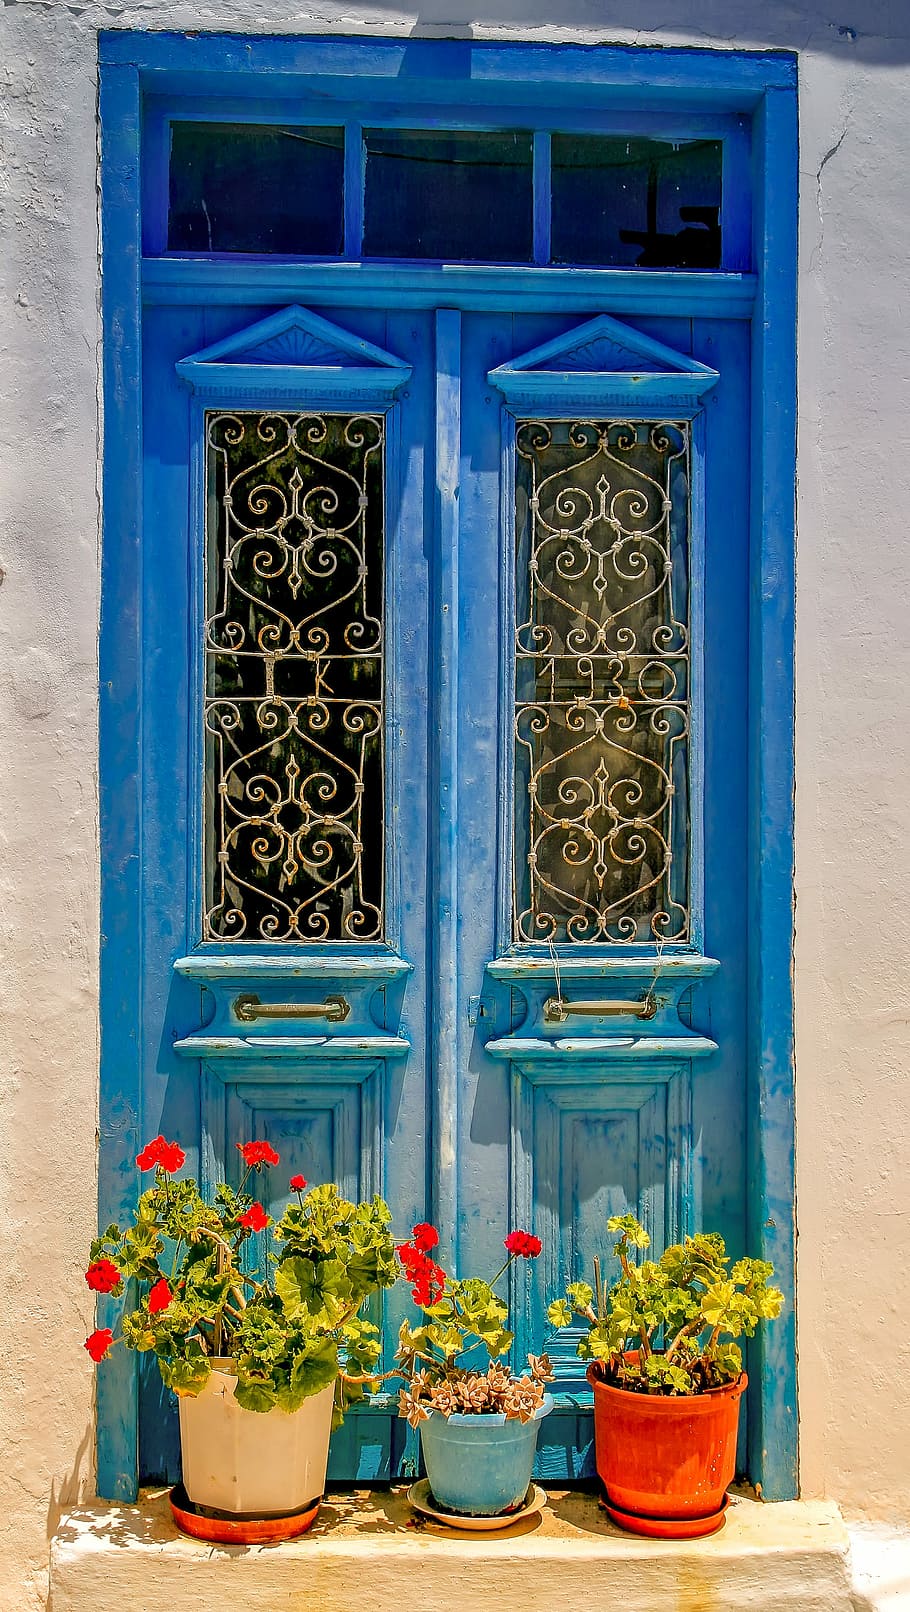 potted, plants, closed, window, architecture, door, holiday, travel, greece, peloponnese